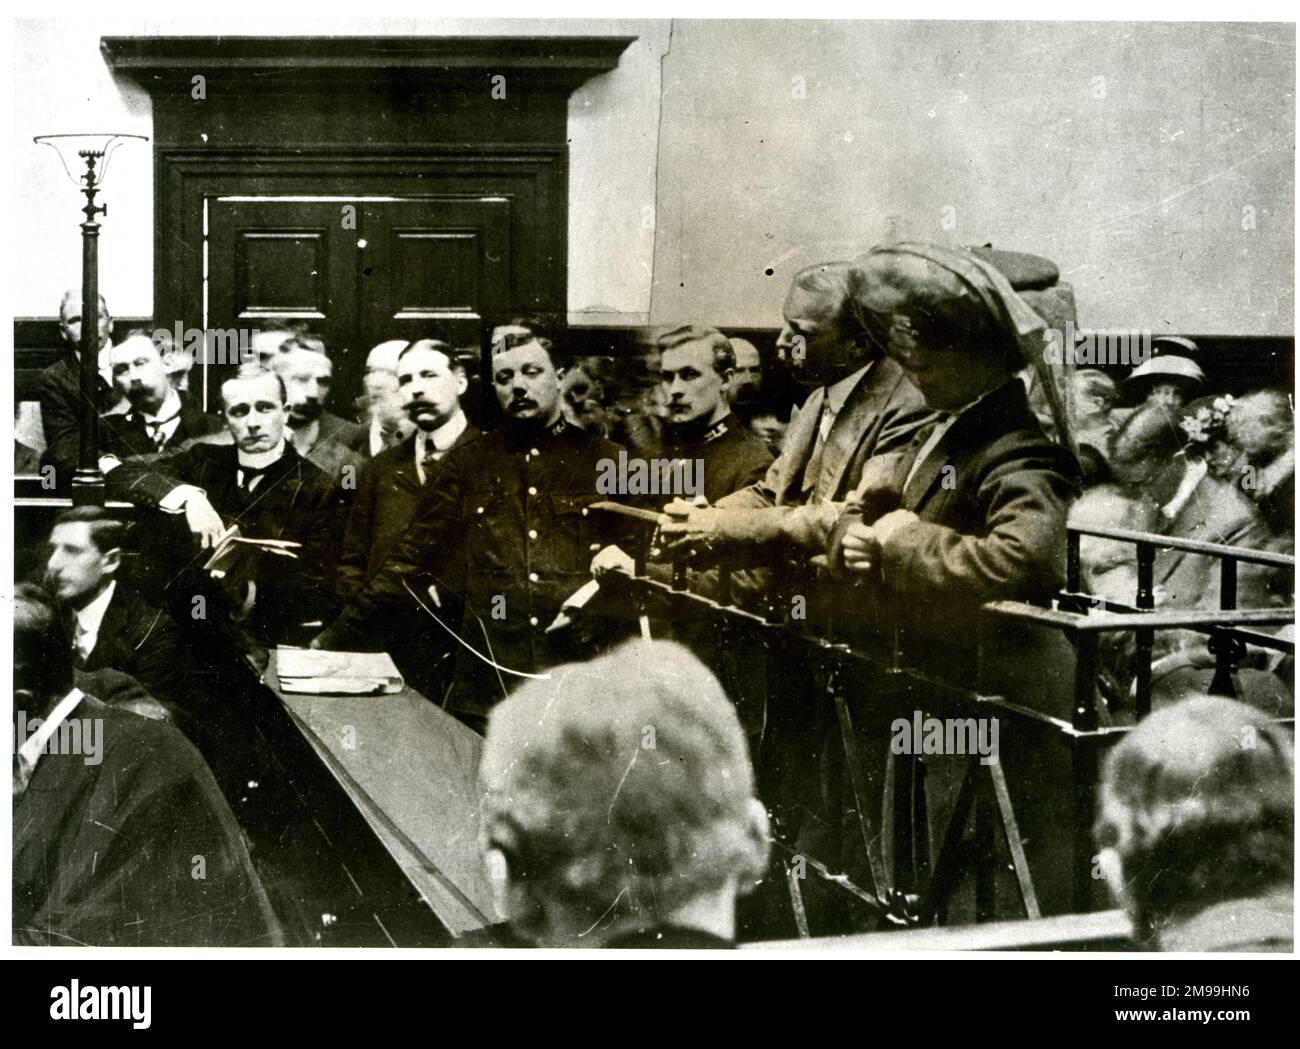 Dr Crippen and Ethel Le Neve on trial in the dock at the Old Bailey, London, on 30 August 1910.  He was convicted of murder and later executed; she was acquitted. Stock Photo